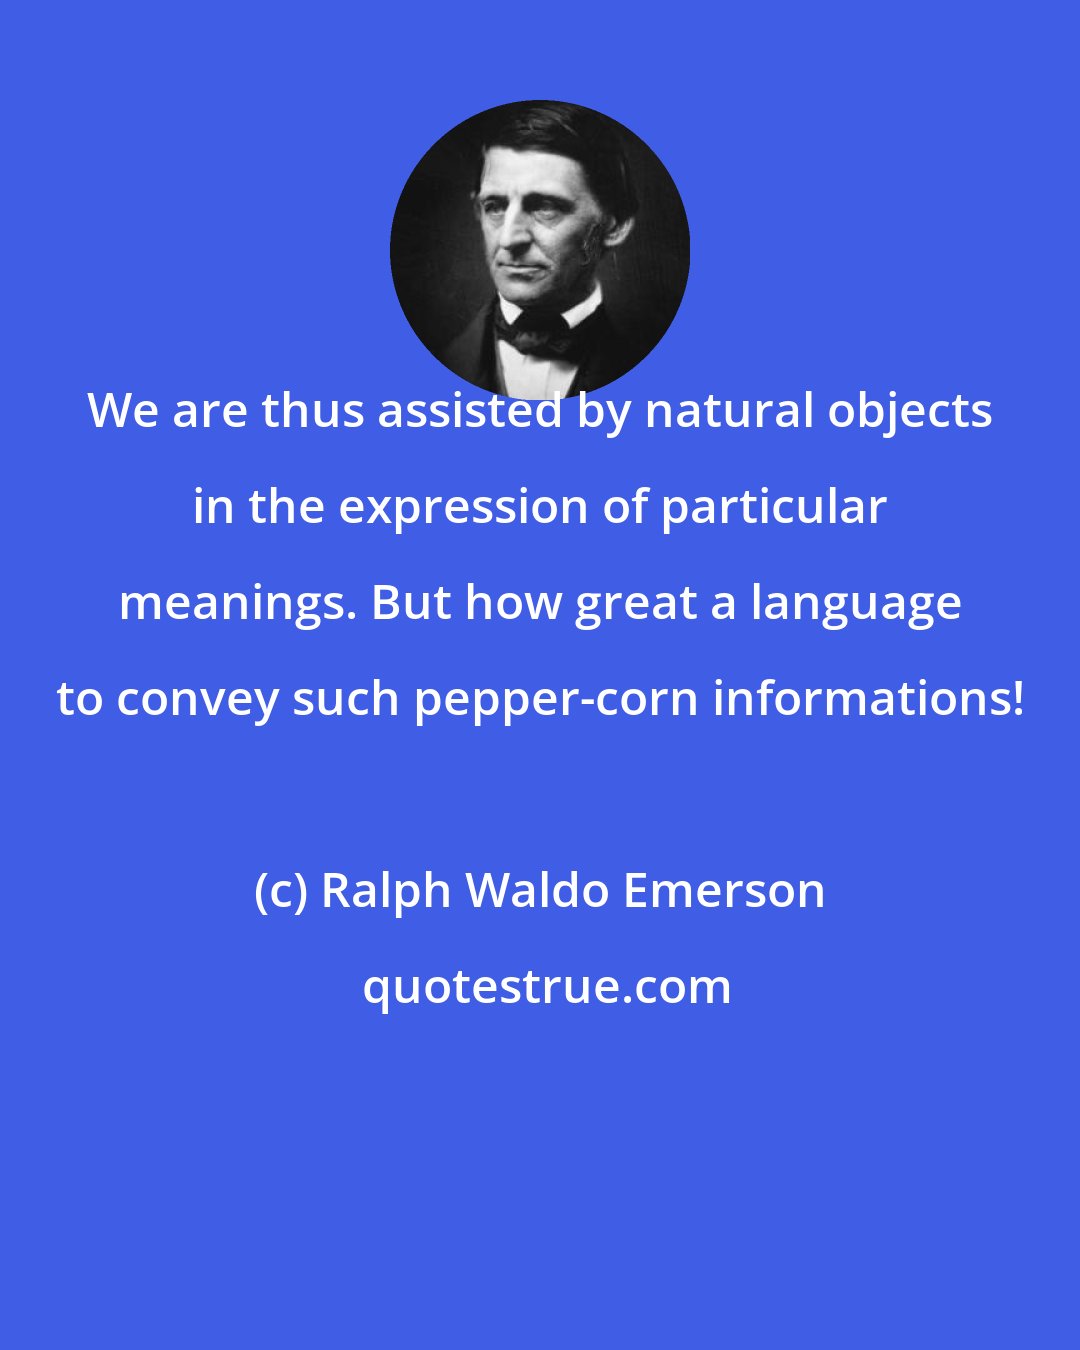 Ralph Waldo Emerson: We are thus assisted by natural objects in the expression of particular meanings. But how great a language to convey such pepper-corn informations!